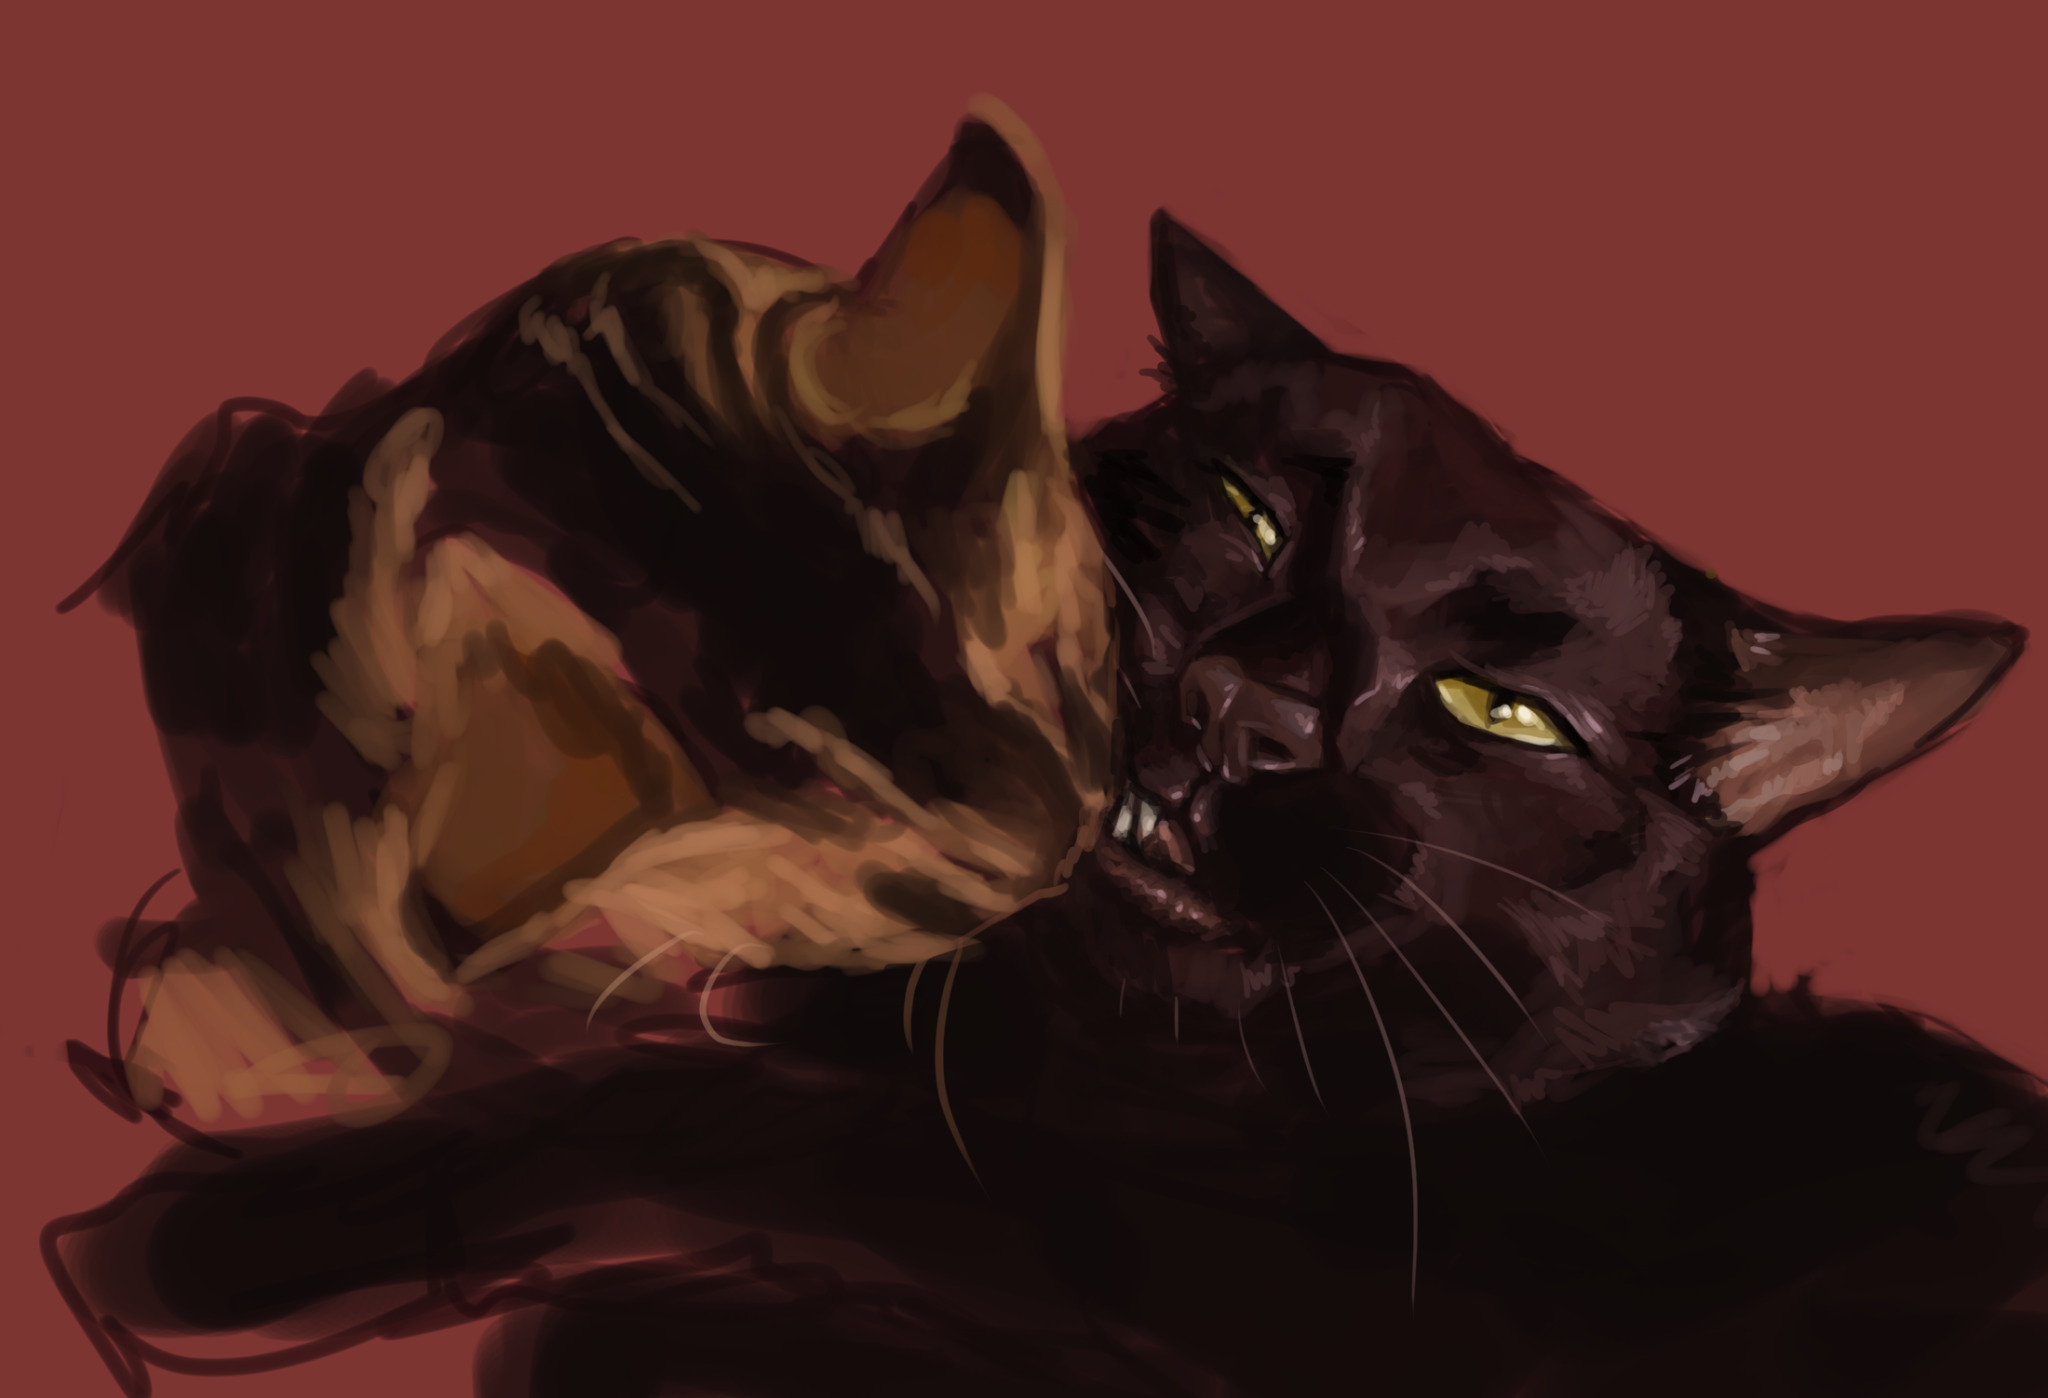 Digital painting of my cats: Cowboy the black cat and Sailor the tabby cat, on a red-brown background. The draing is half-unfinished and shows cowboy making an annoyed face with his tooth visible as Sailor is trying to groom the side of his face.